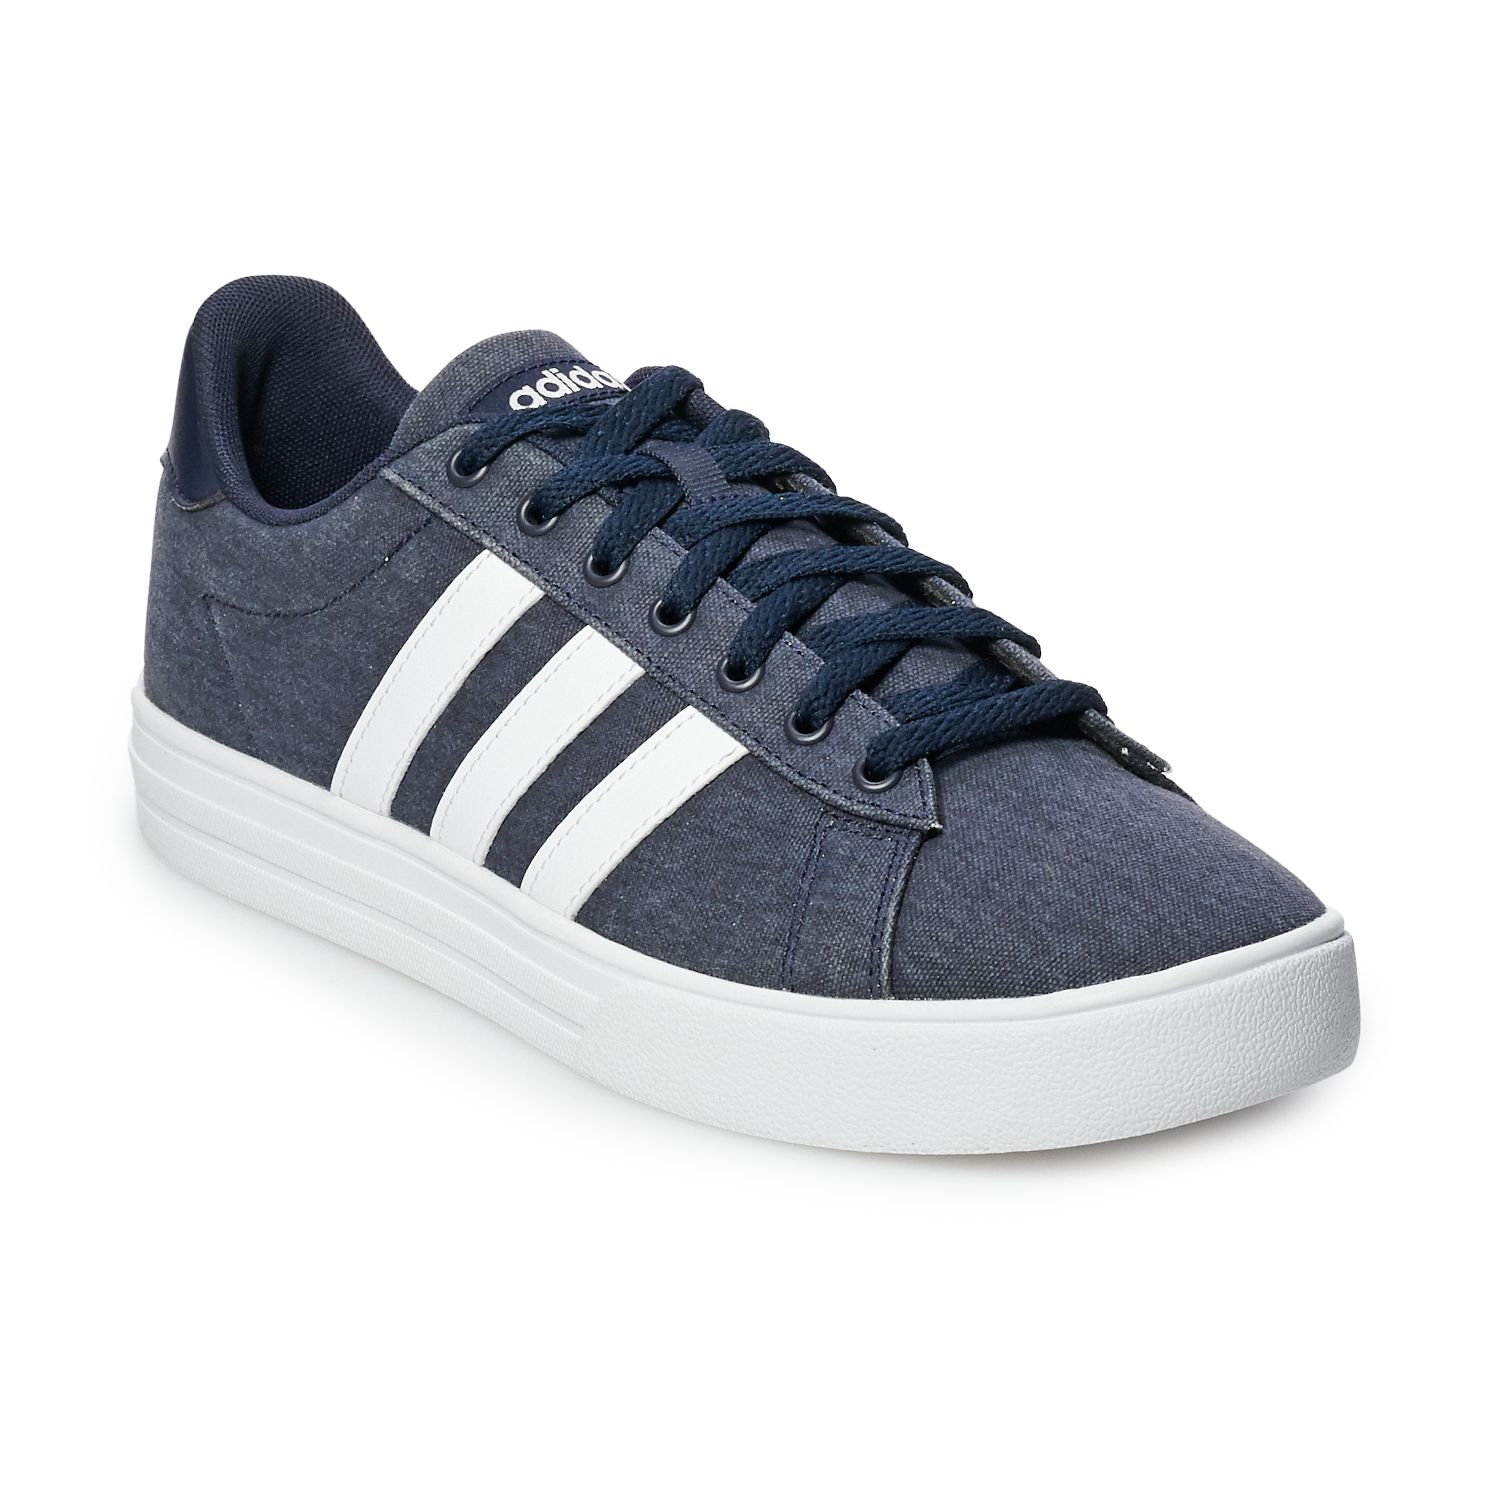 adidas daily 2.0 mens casual shoes